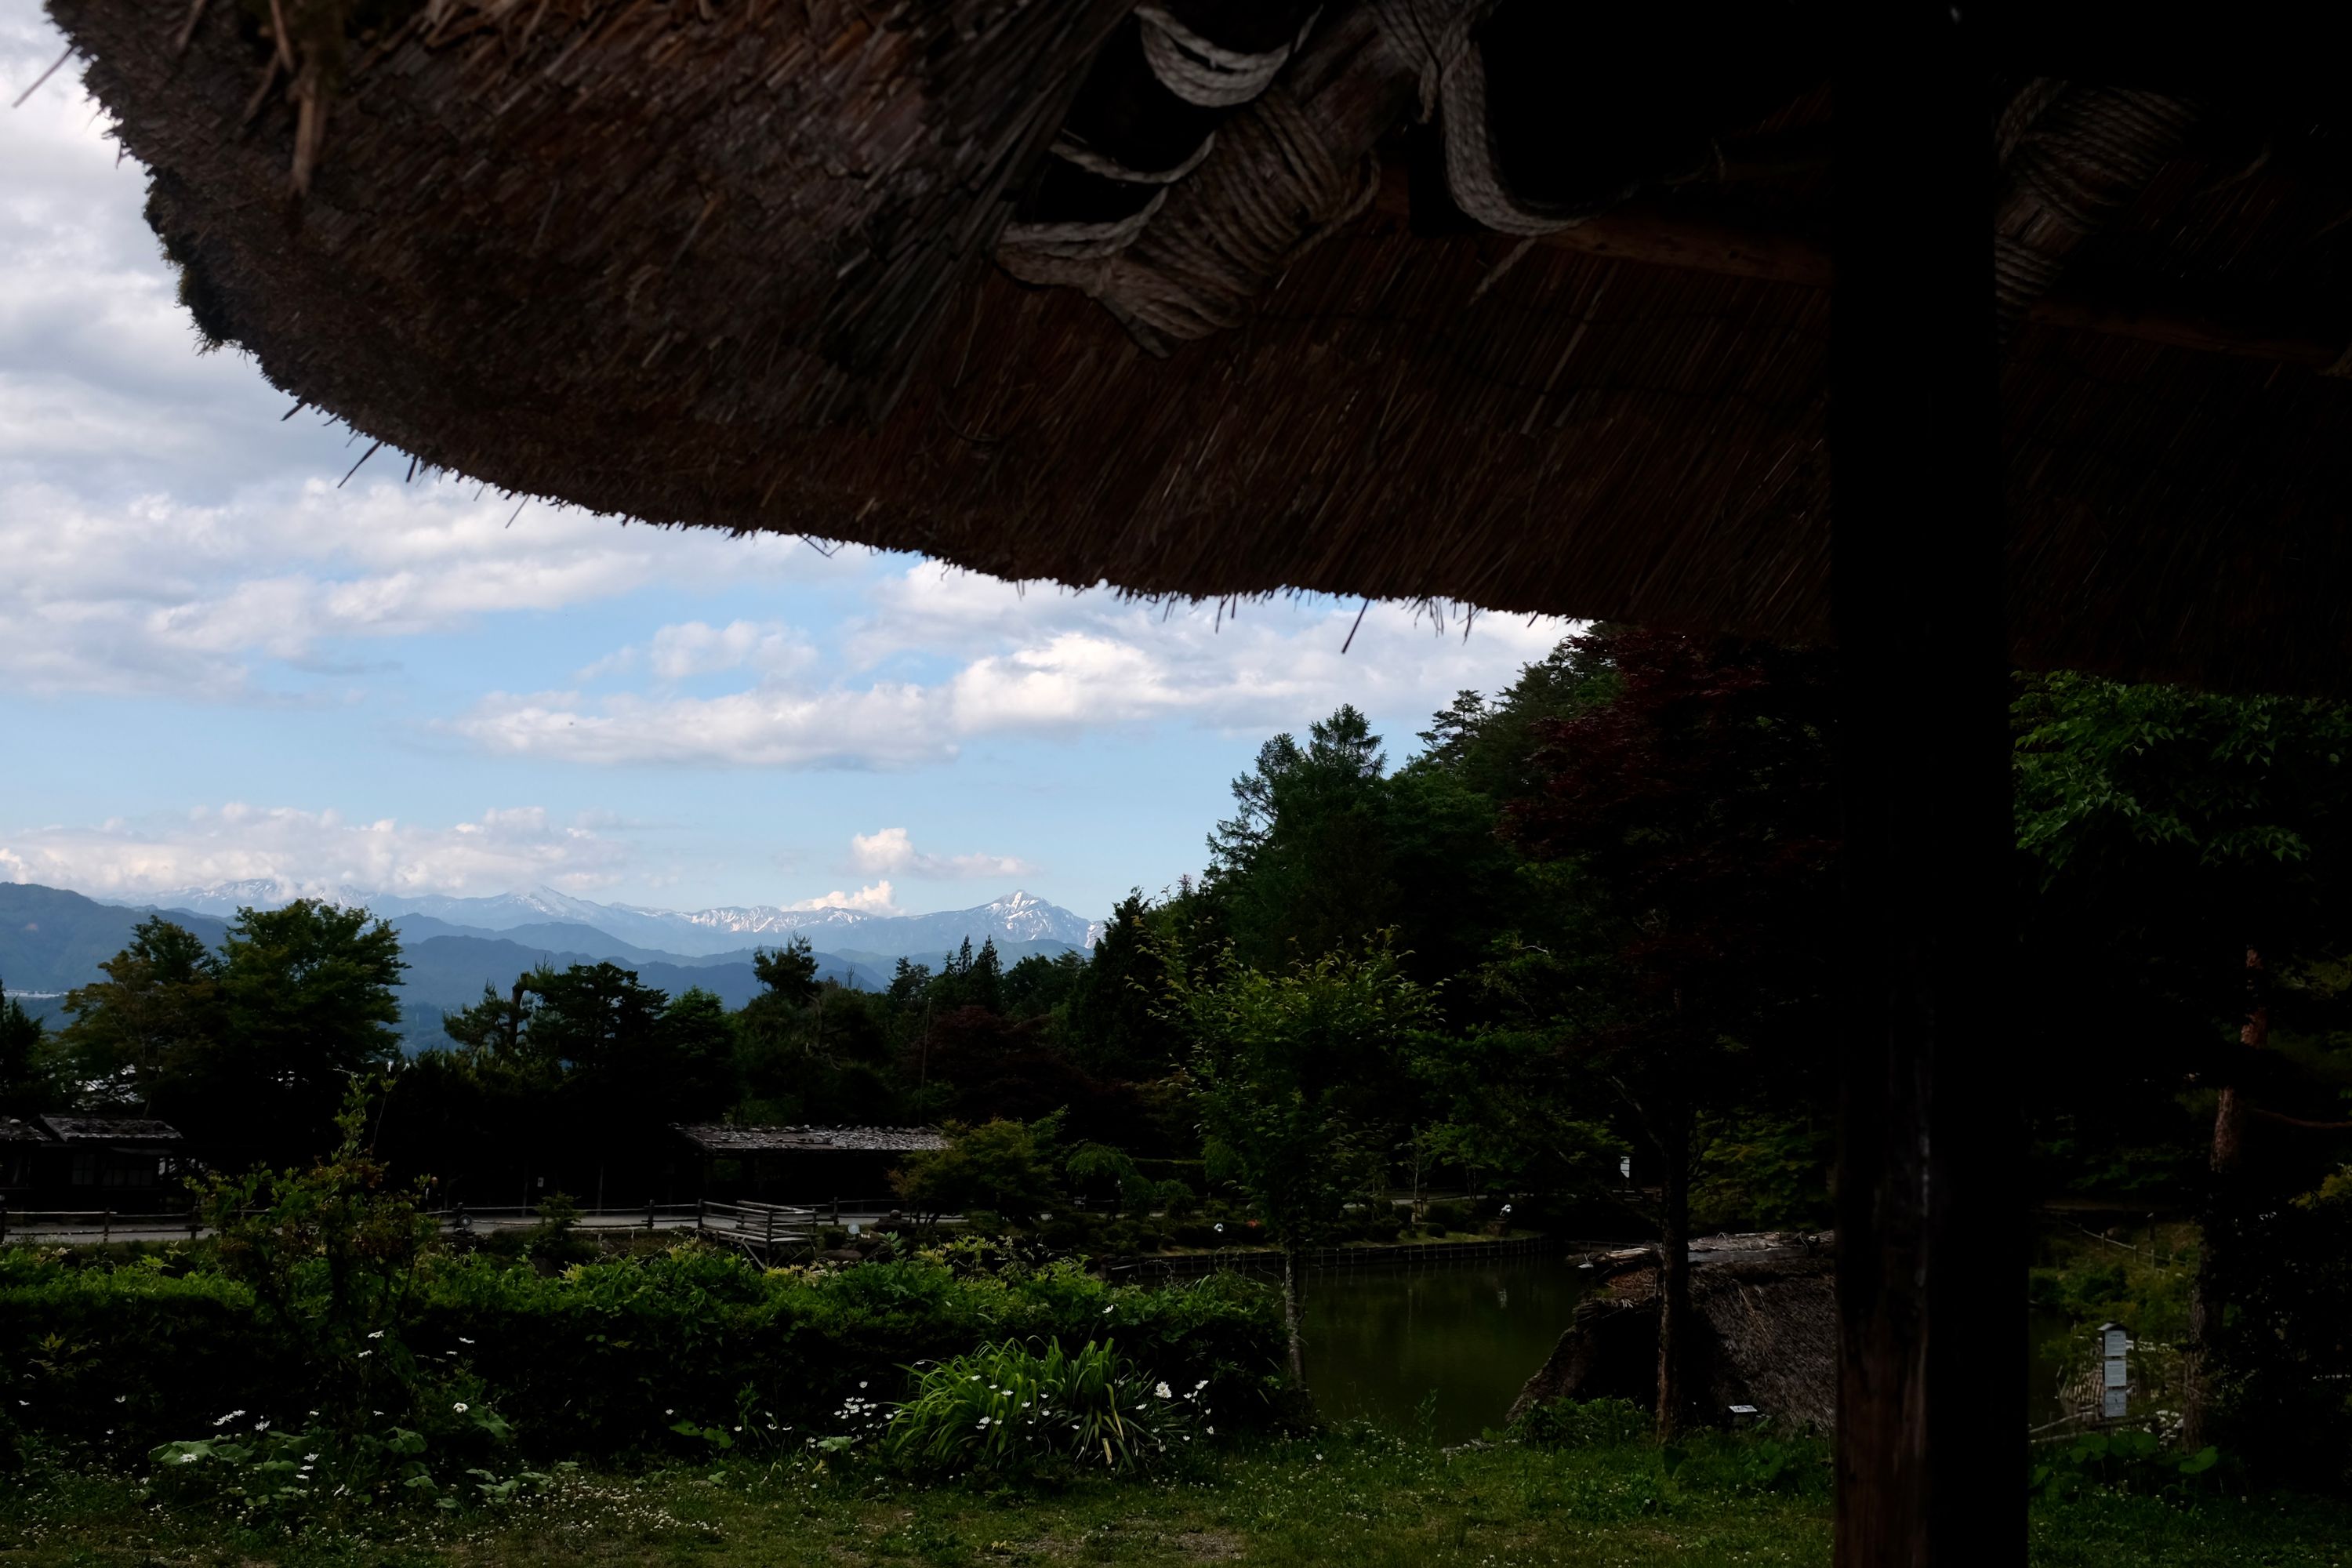 Looking out on the Hida Mountains from underneath the eaves of a thatch-roofed Japanese farmhouse.